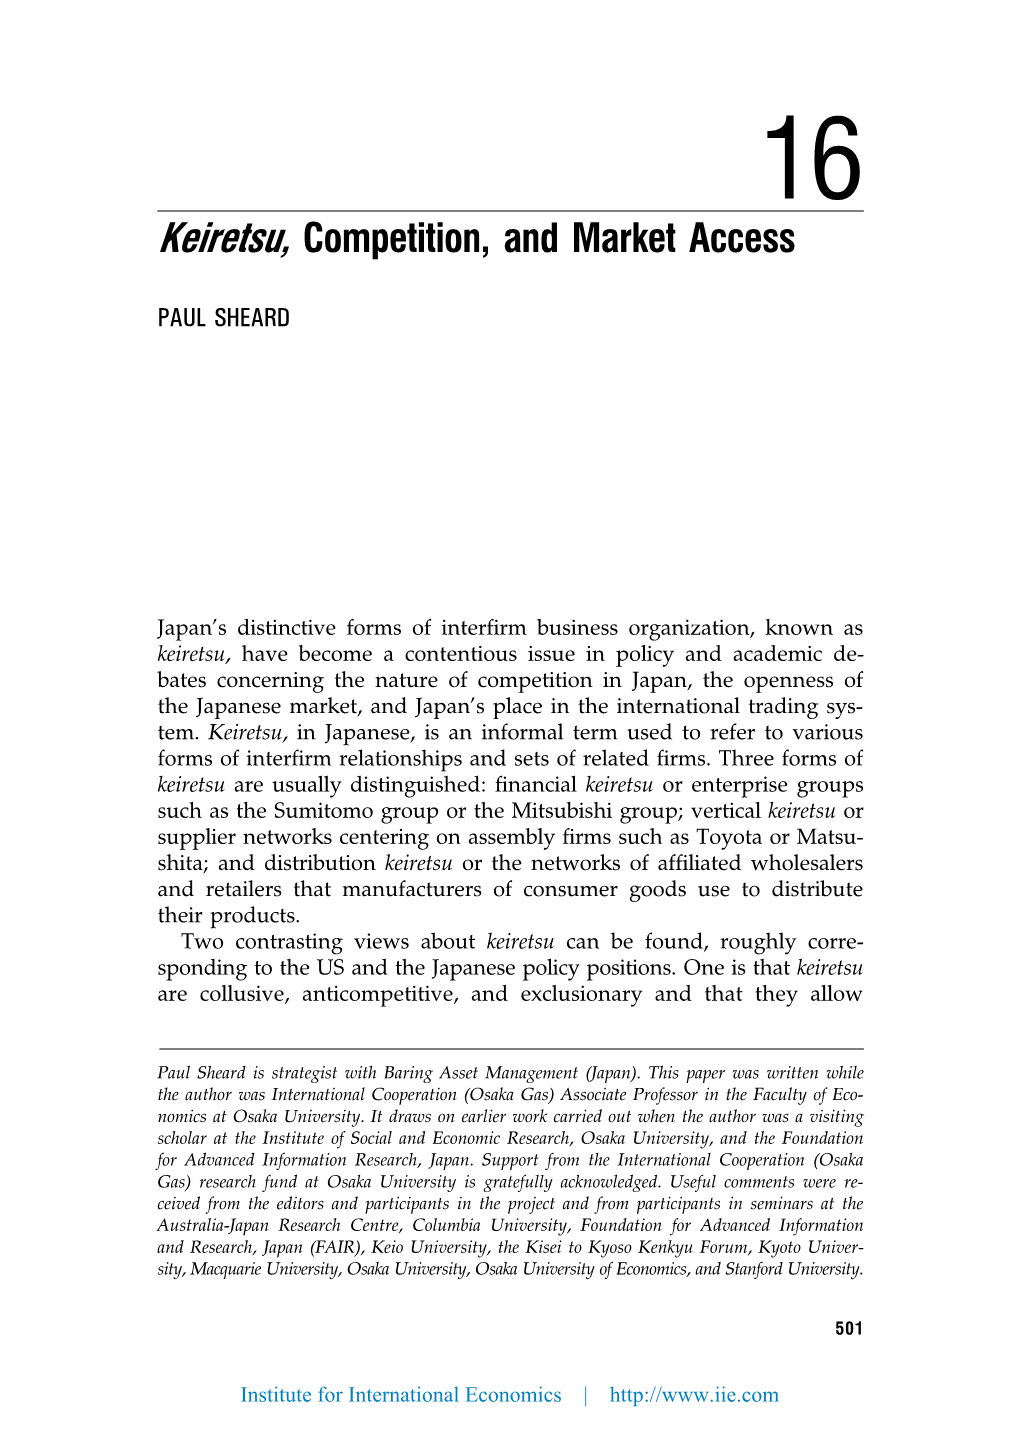 Keiretsu, Competition, and Market Access